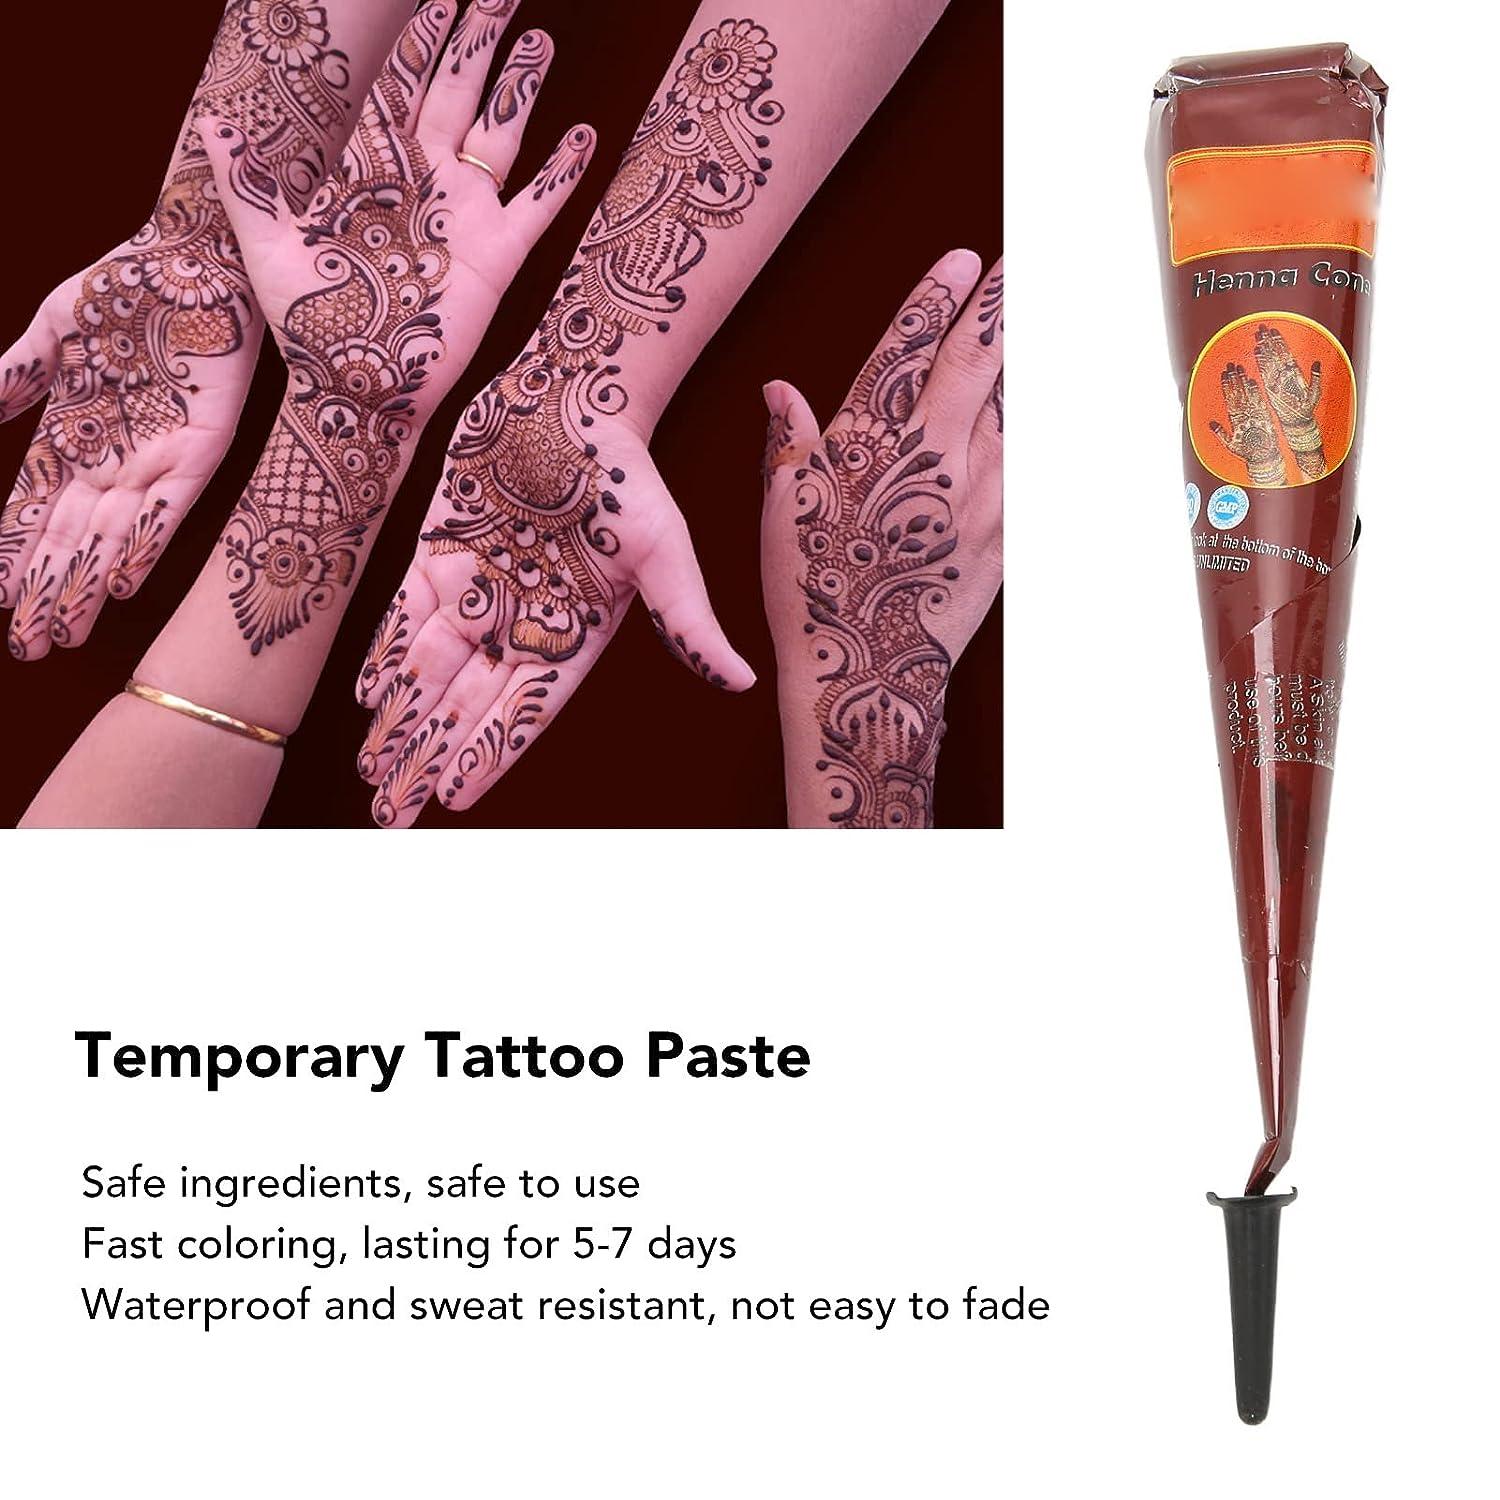 Henna Mehndi India Stencil Kit Semi Permanent Finger Tattoos Templates For  Hand And Body Painting With From Gdeal, $6.84 | DHgate.Com